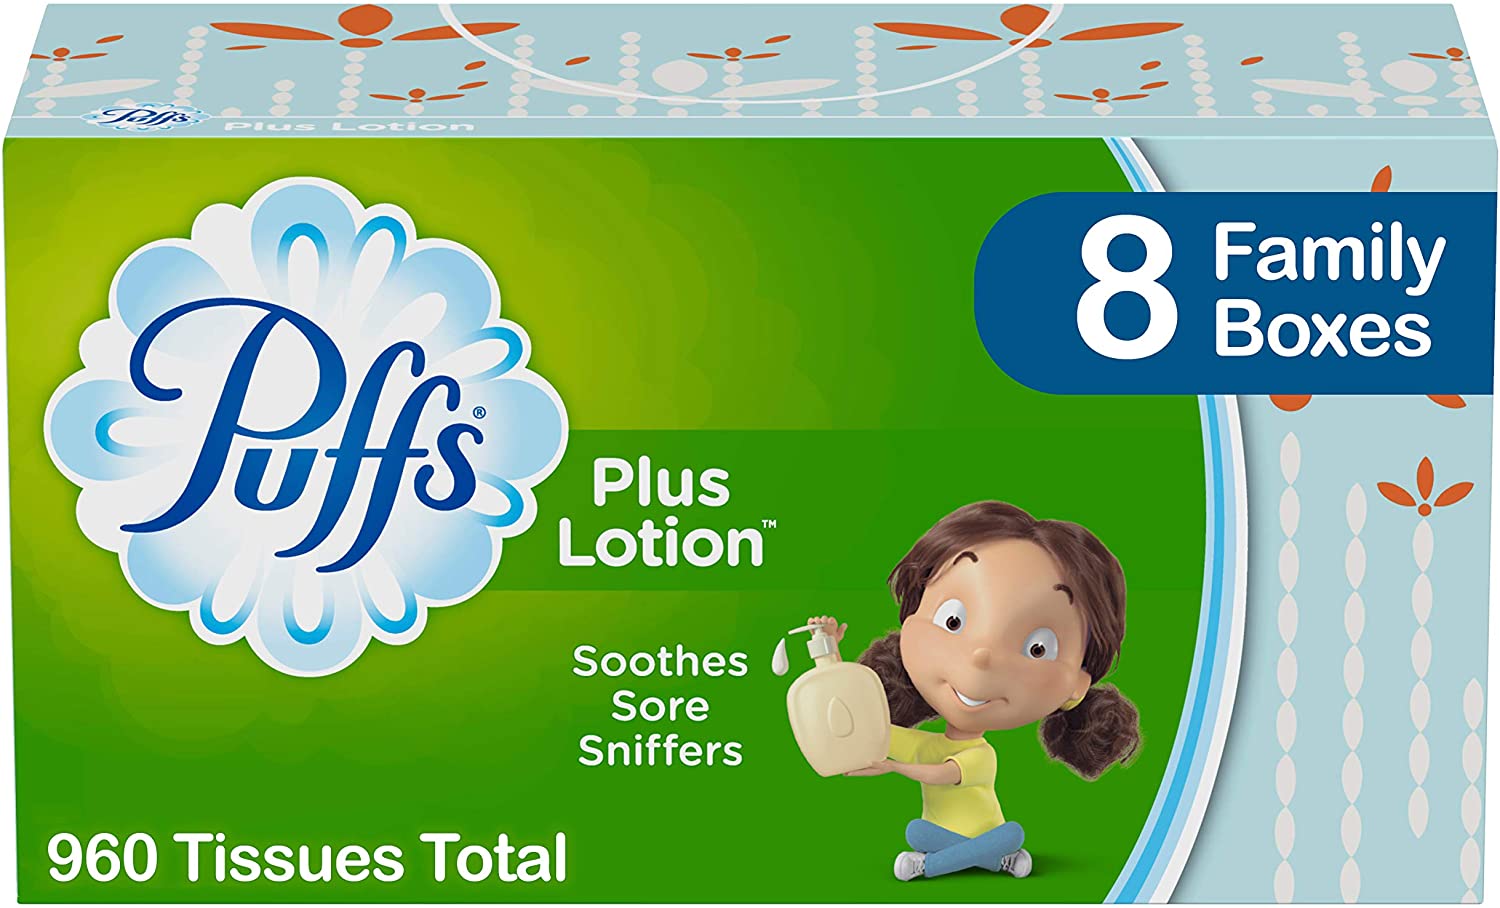 8-Pack 120-Ct Puffs Plus Lotion Facial Tissues $12.20 + Free Shipping w/ Amazon Prime or Orders $25+